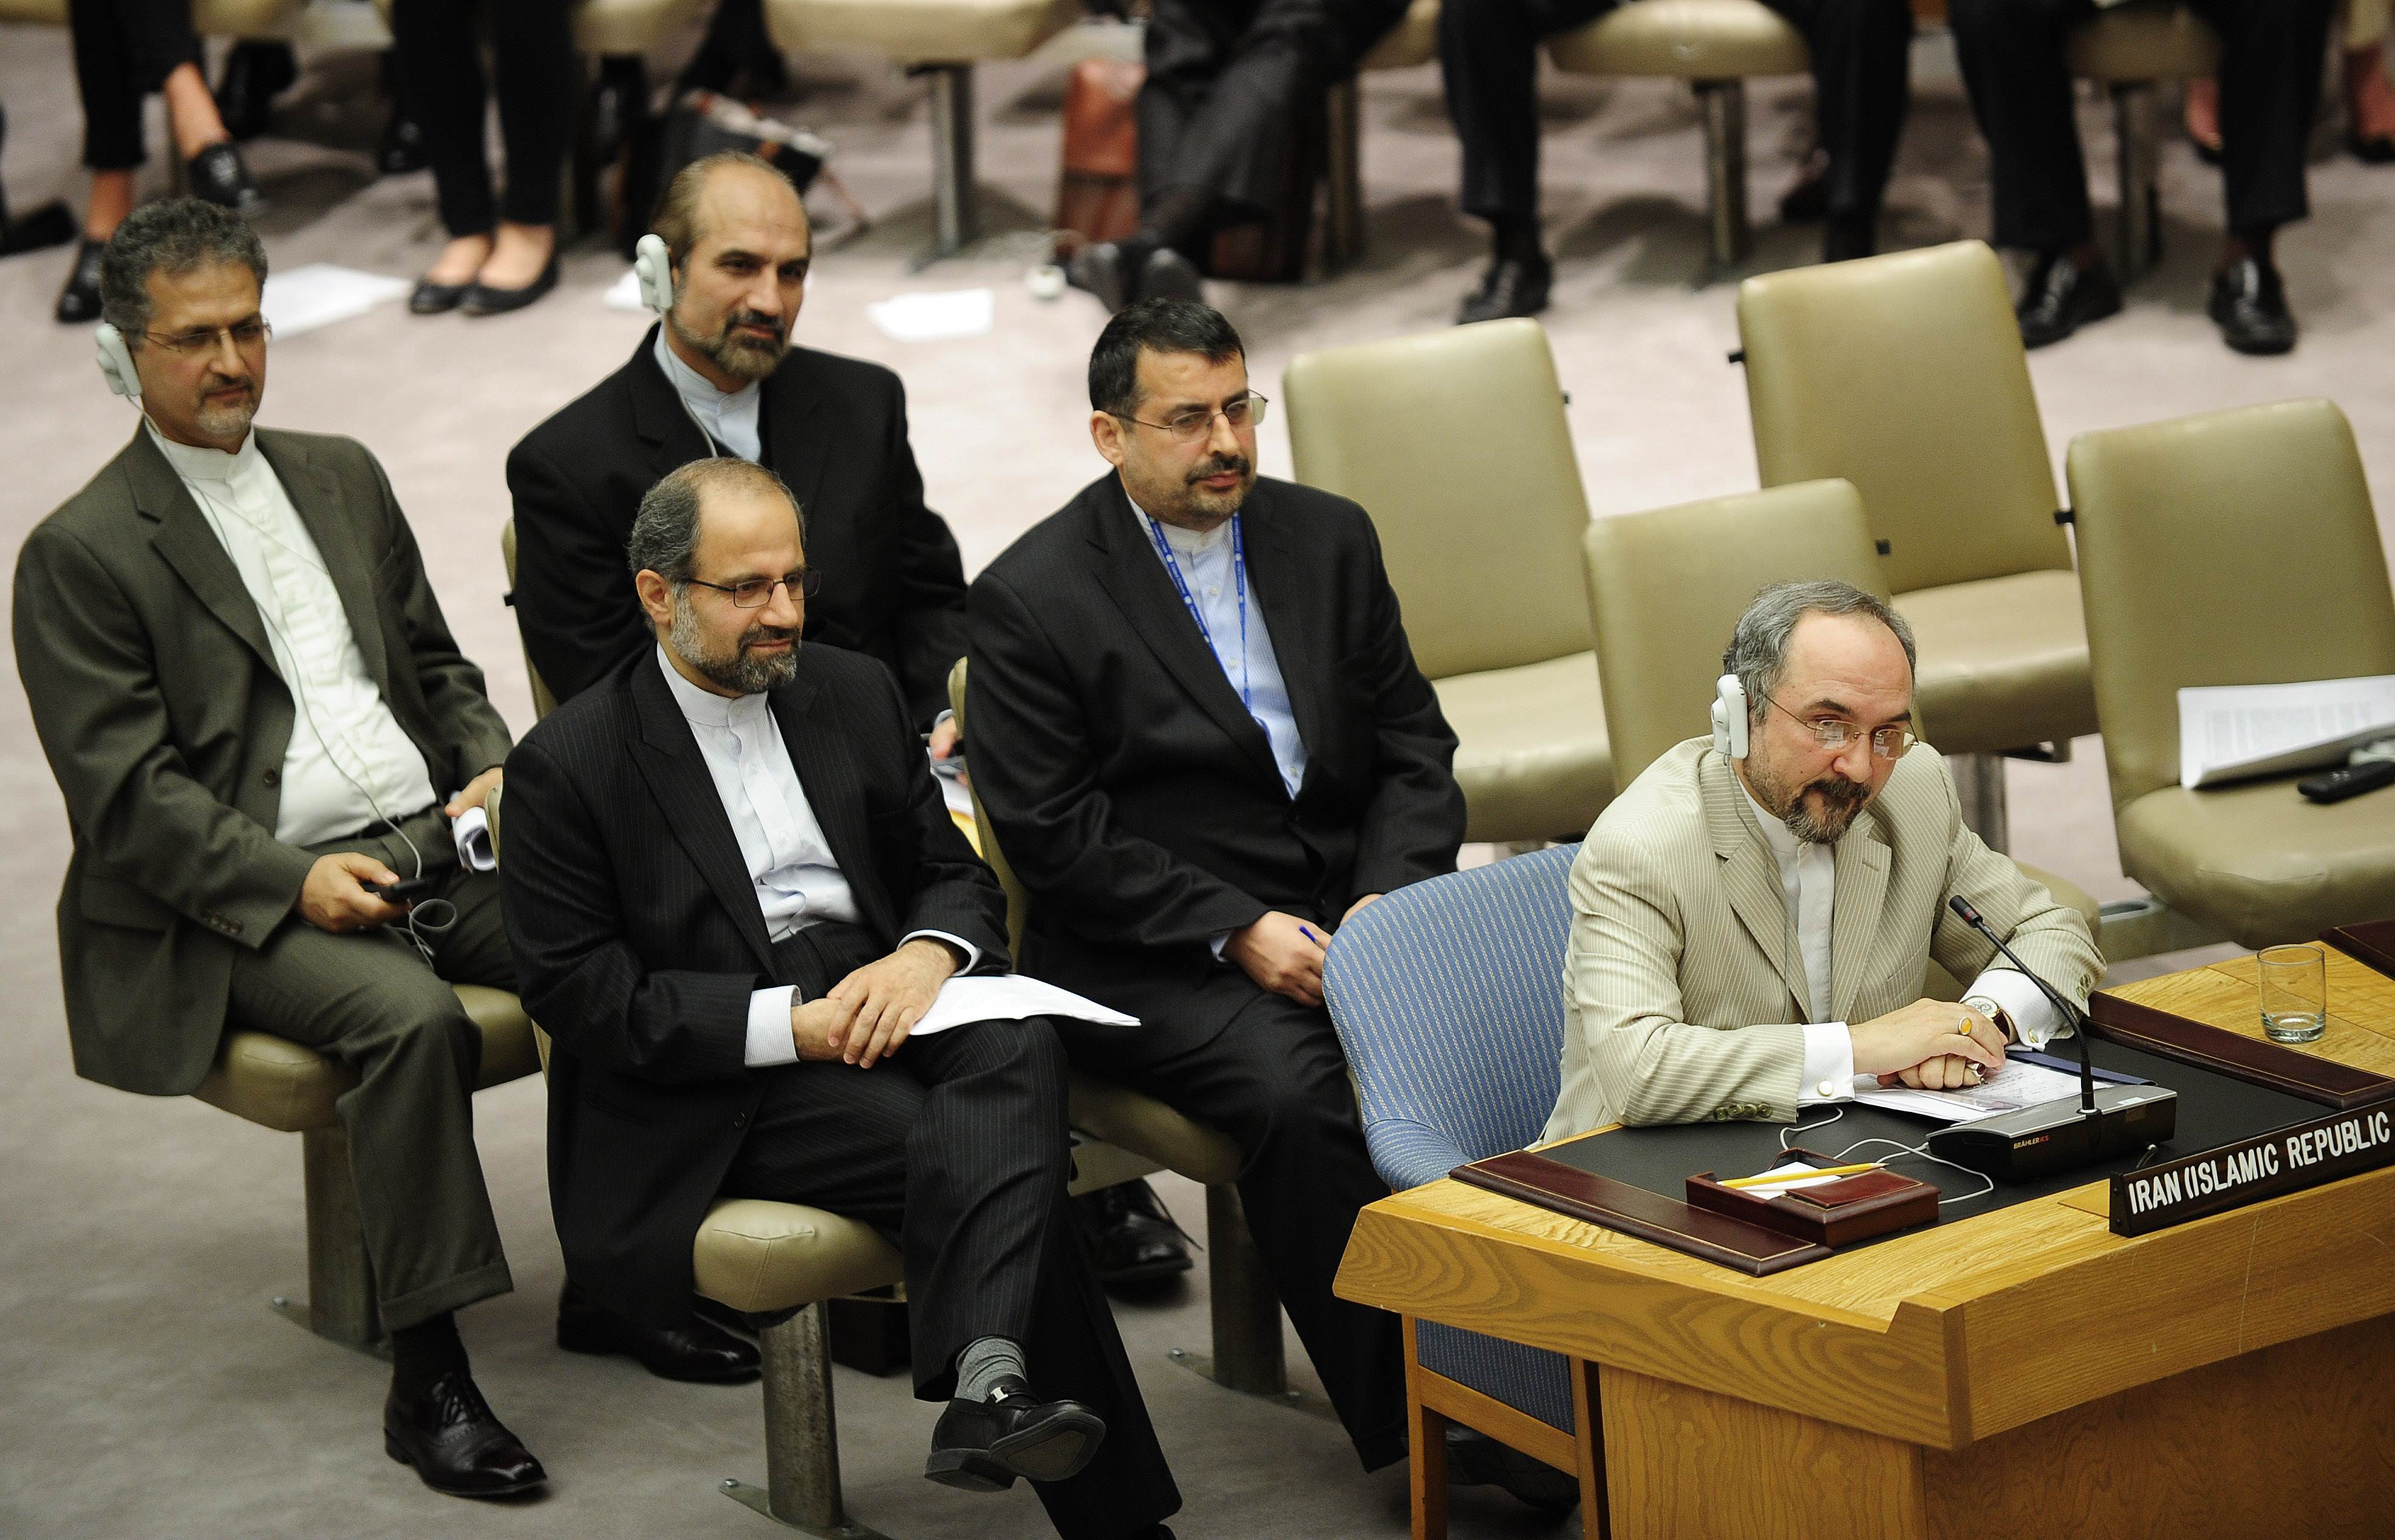 Iranian ambassador to the UN Mohammad Khazaee in this file image. Photo: AFP